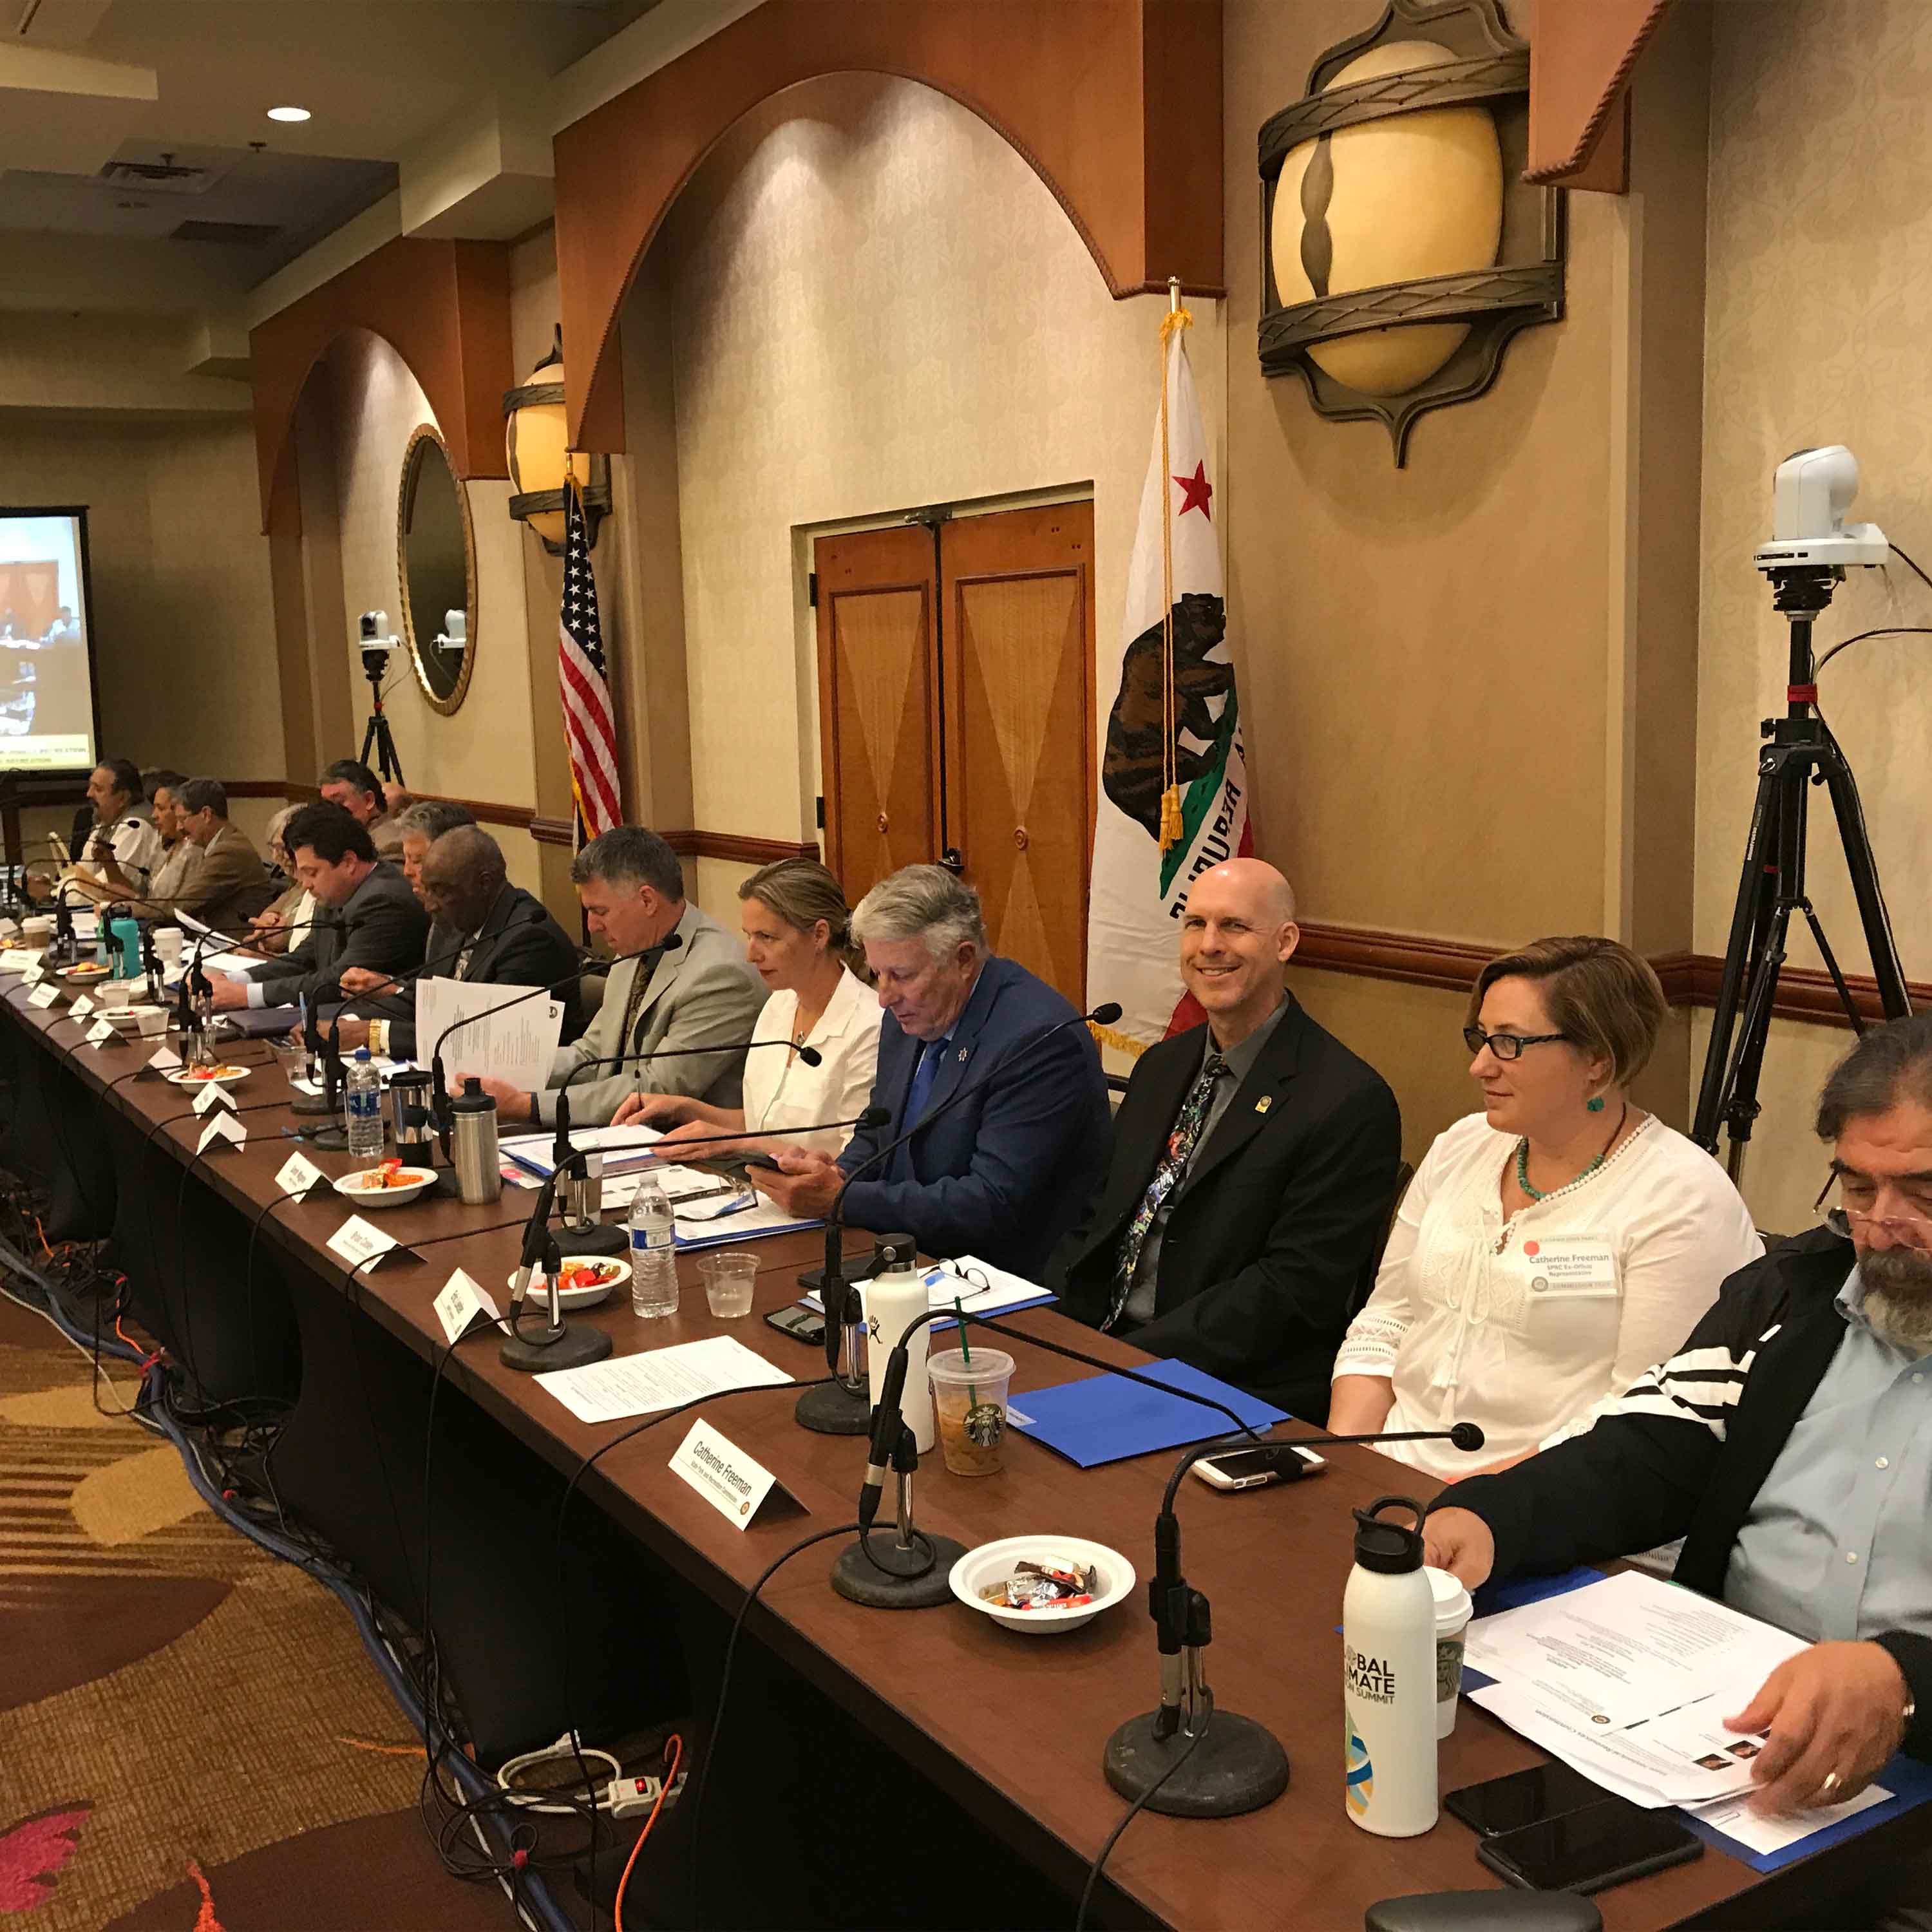 2018 - Joint meeting of 4 Commissions: Boating & Waterways, Office of Historic Preservation, State Parks & Recreation, and the OHMVR